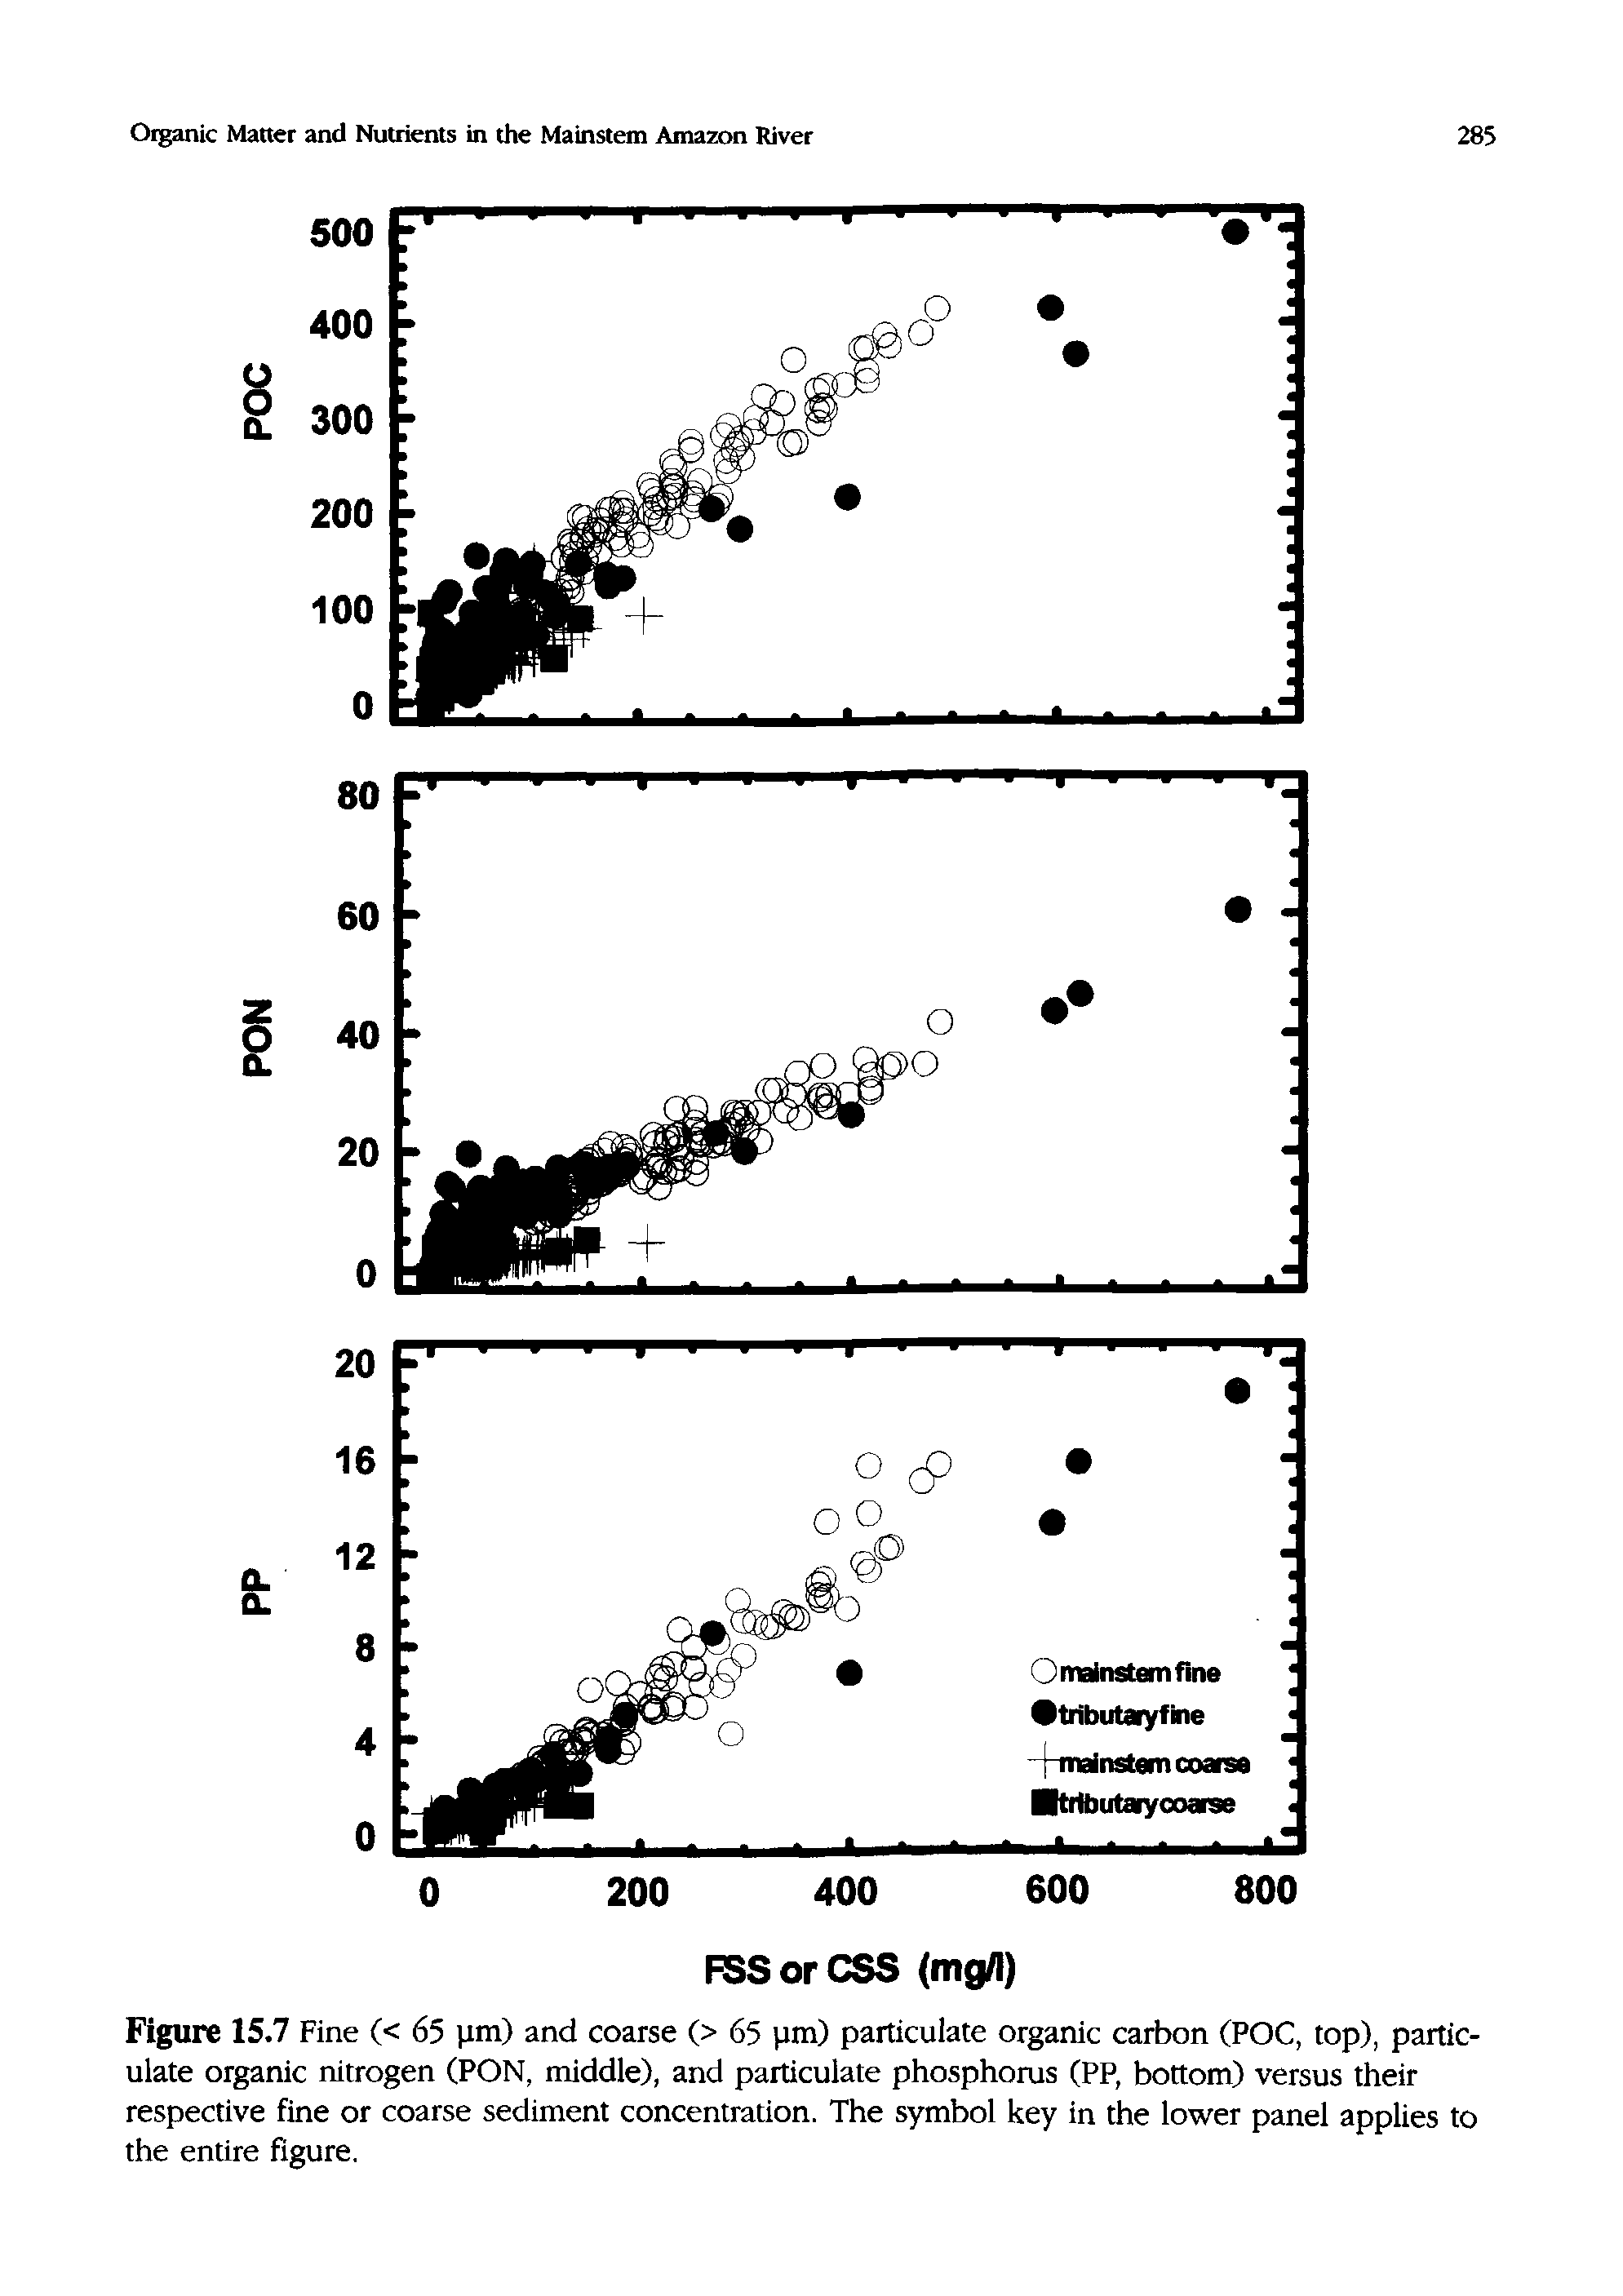 Figure 15.7 Fine (< 65 ]im) and coarse (> 65 pm) particulate organic carbon (POC, top), particulate organic nitrogen (PON, middle), and particulate phosphorus (PP, bottom) versus their respective fine or coarse sediment concentration. The symbol key in the lower panel applies to the entire figure.